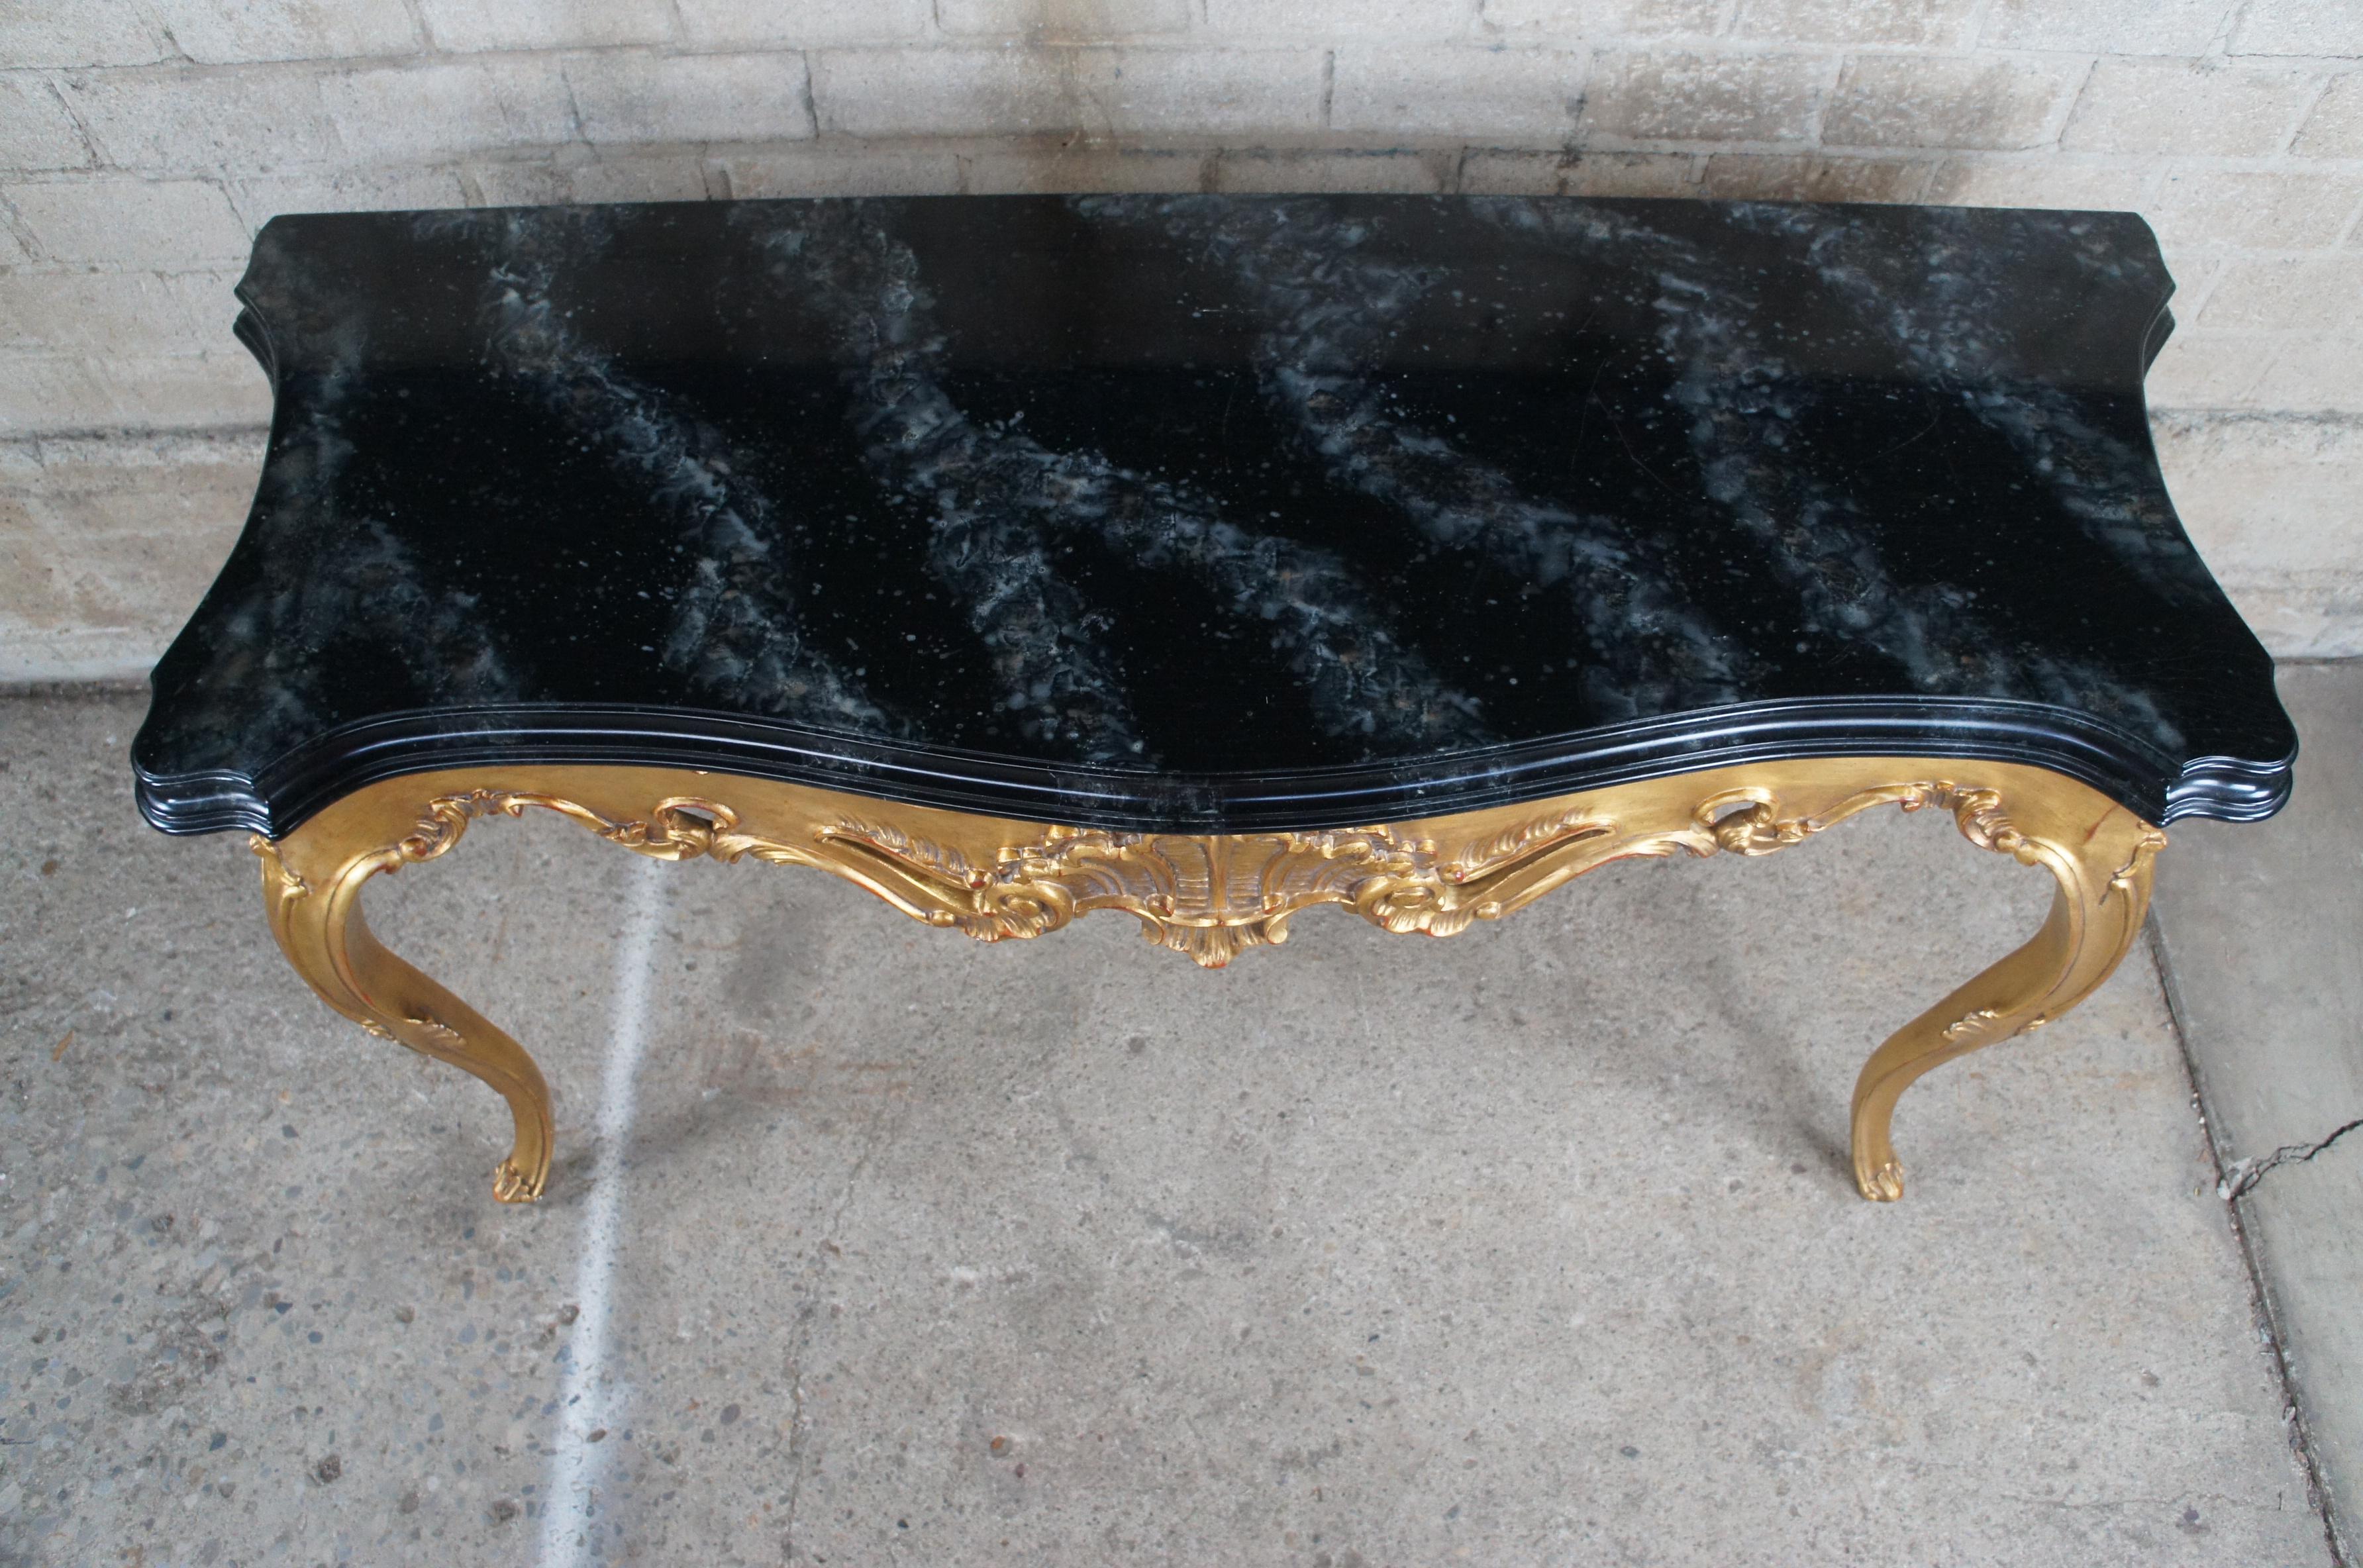 20th Century Italian Serpentine Baroque Rococo Style Faux Marble Console Table In Good Condition For Sale In Dayton, OH